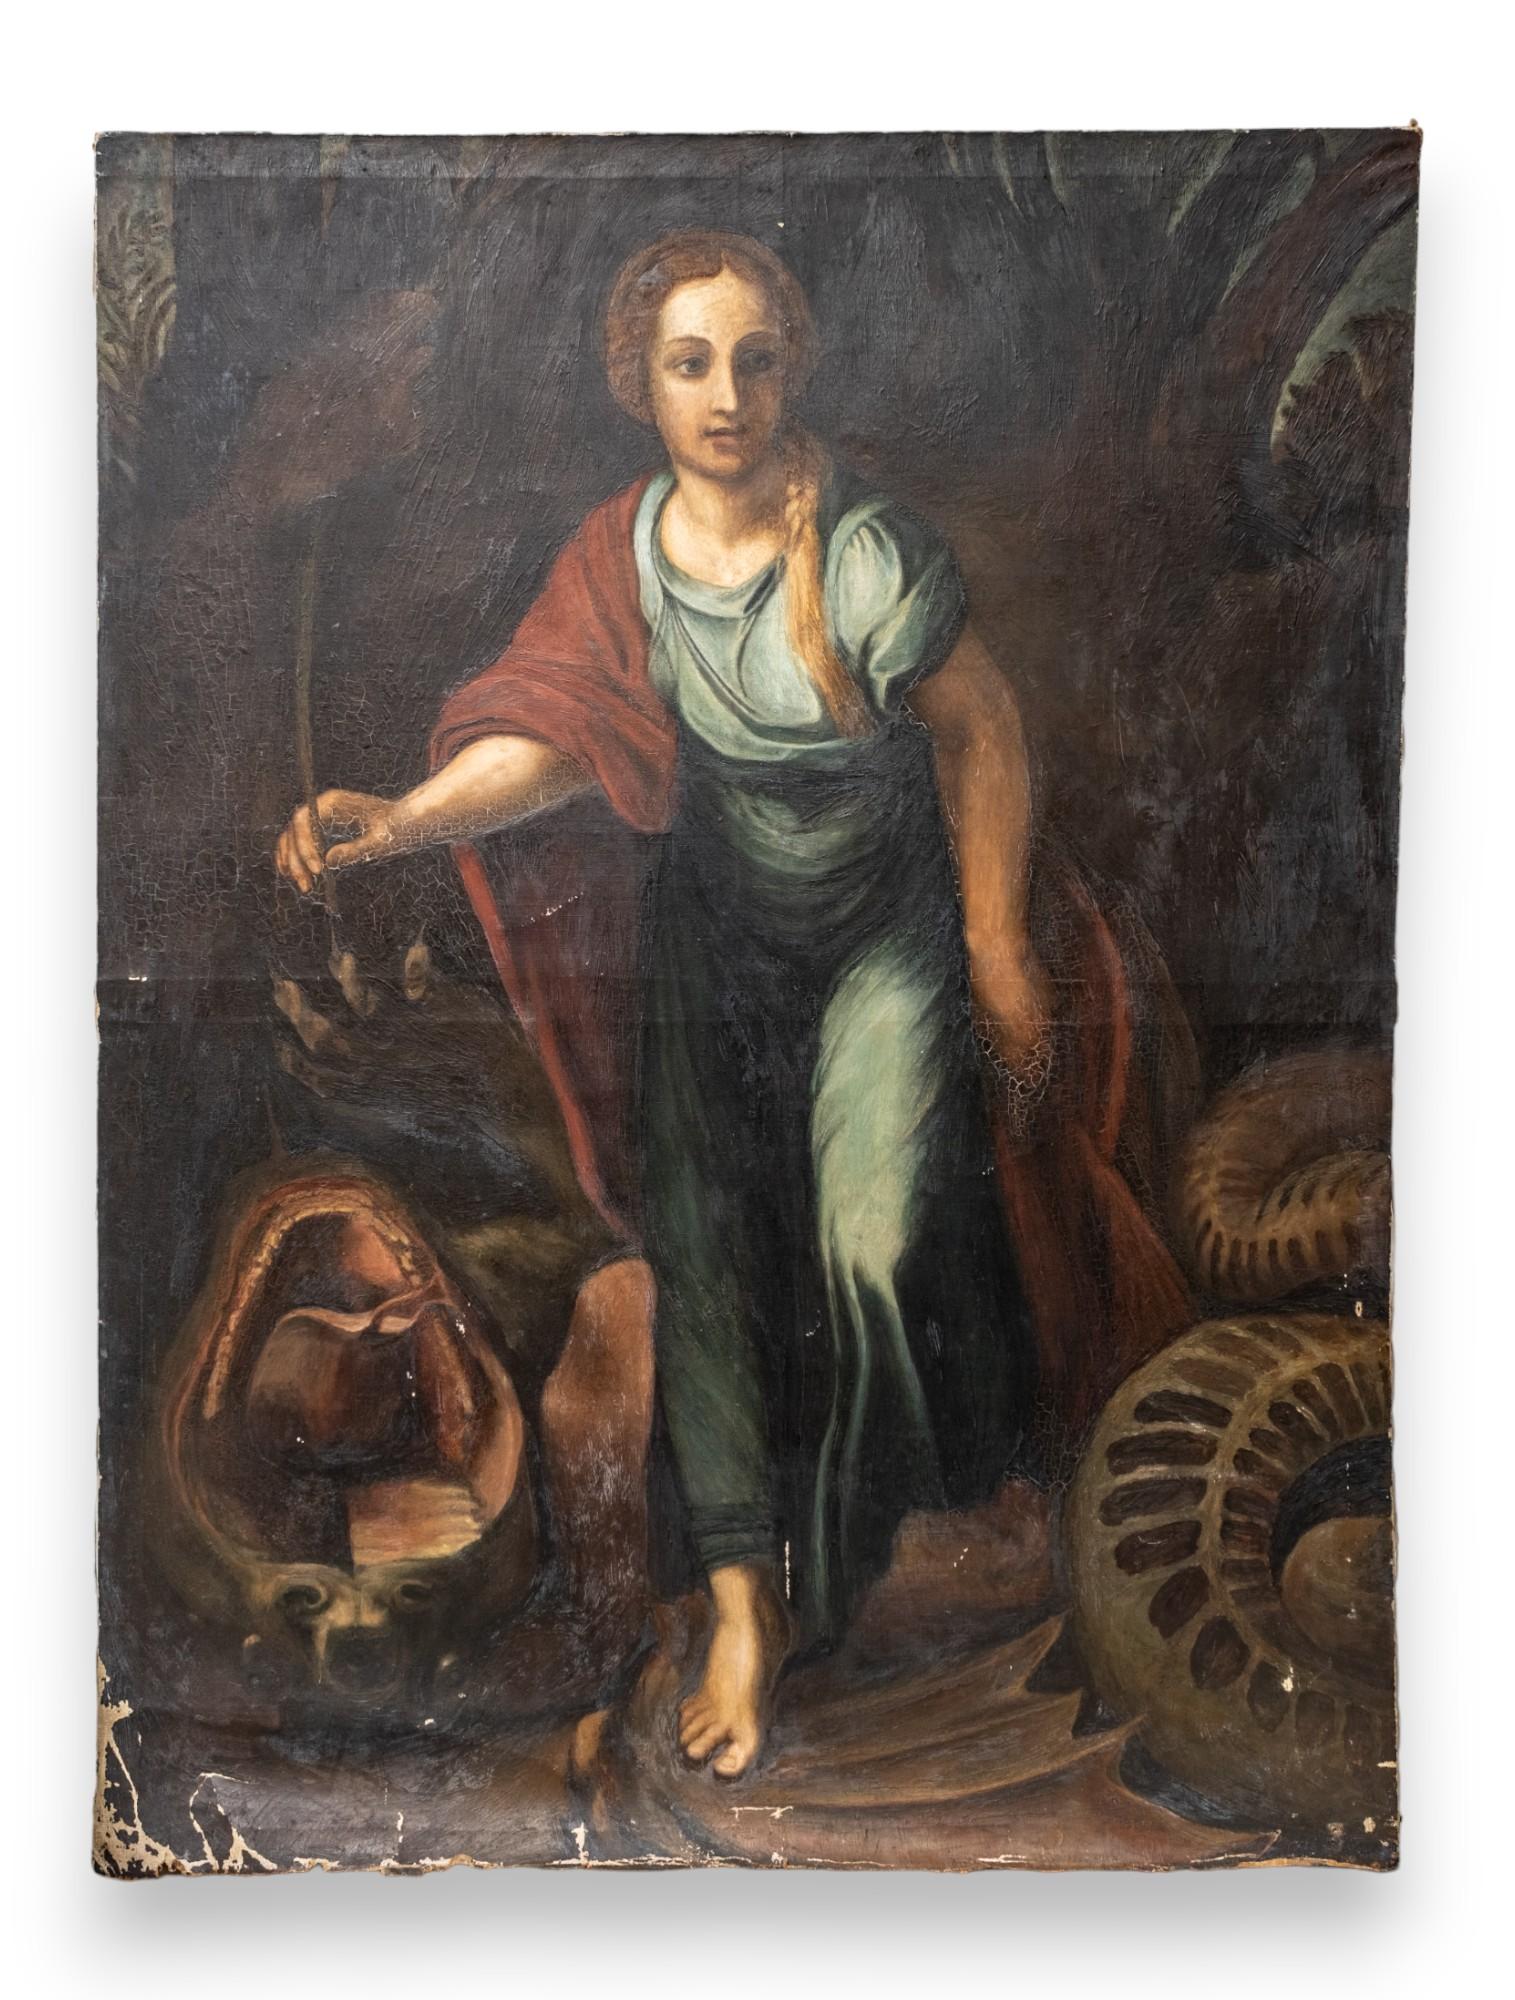 Saint Margaret slaying the dragon oil on canvas painting and attributed to Giulio Romano. This painting is similar to one in the Louvre collection that was attrib to Giulio Romano. 
Provenance: Purchased in France by collector